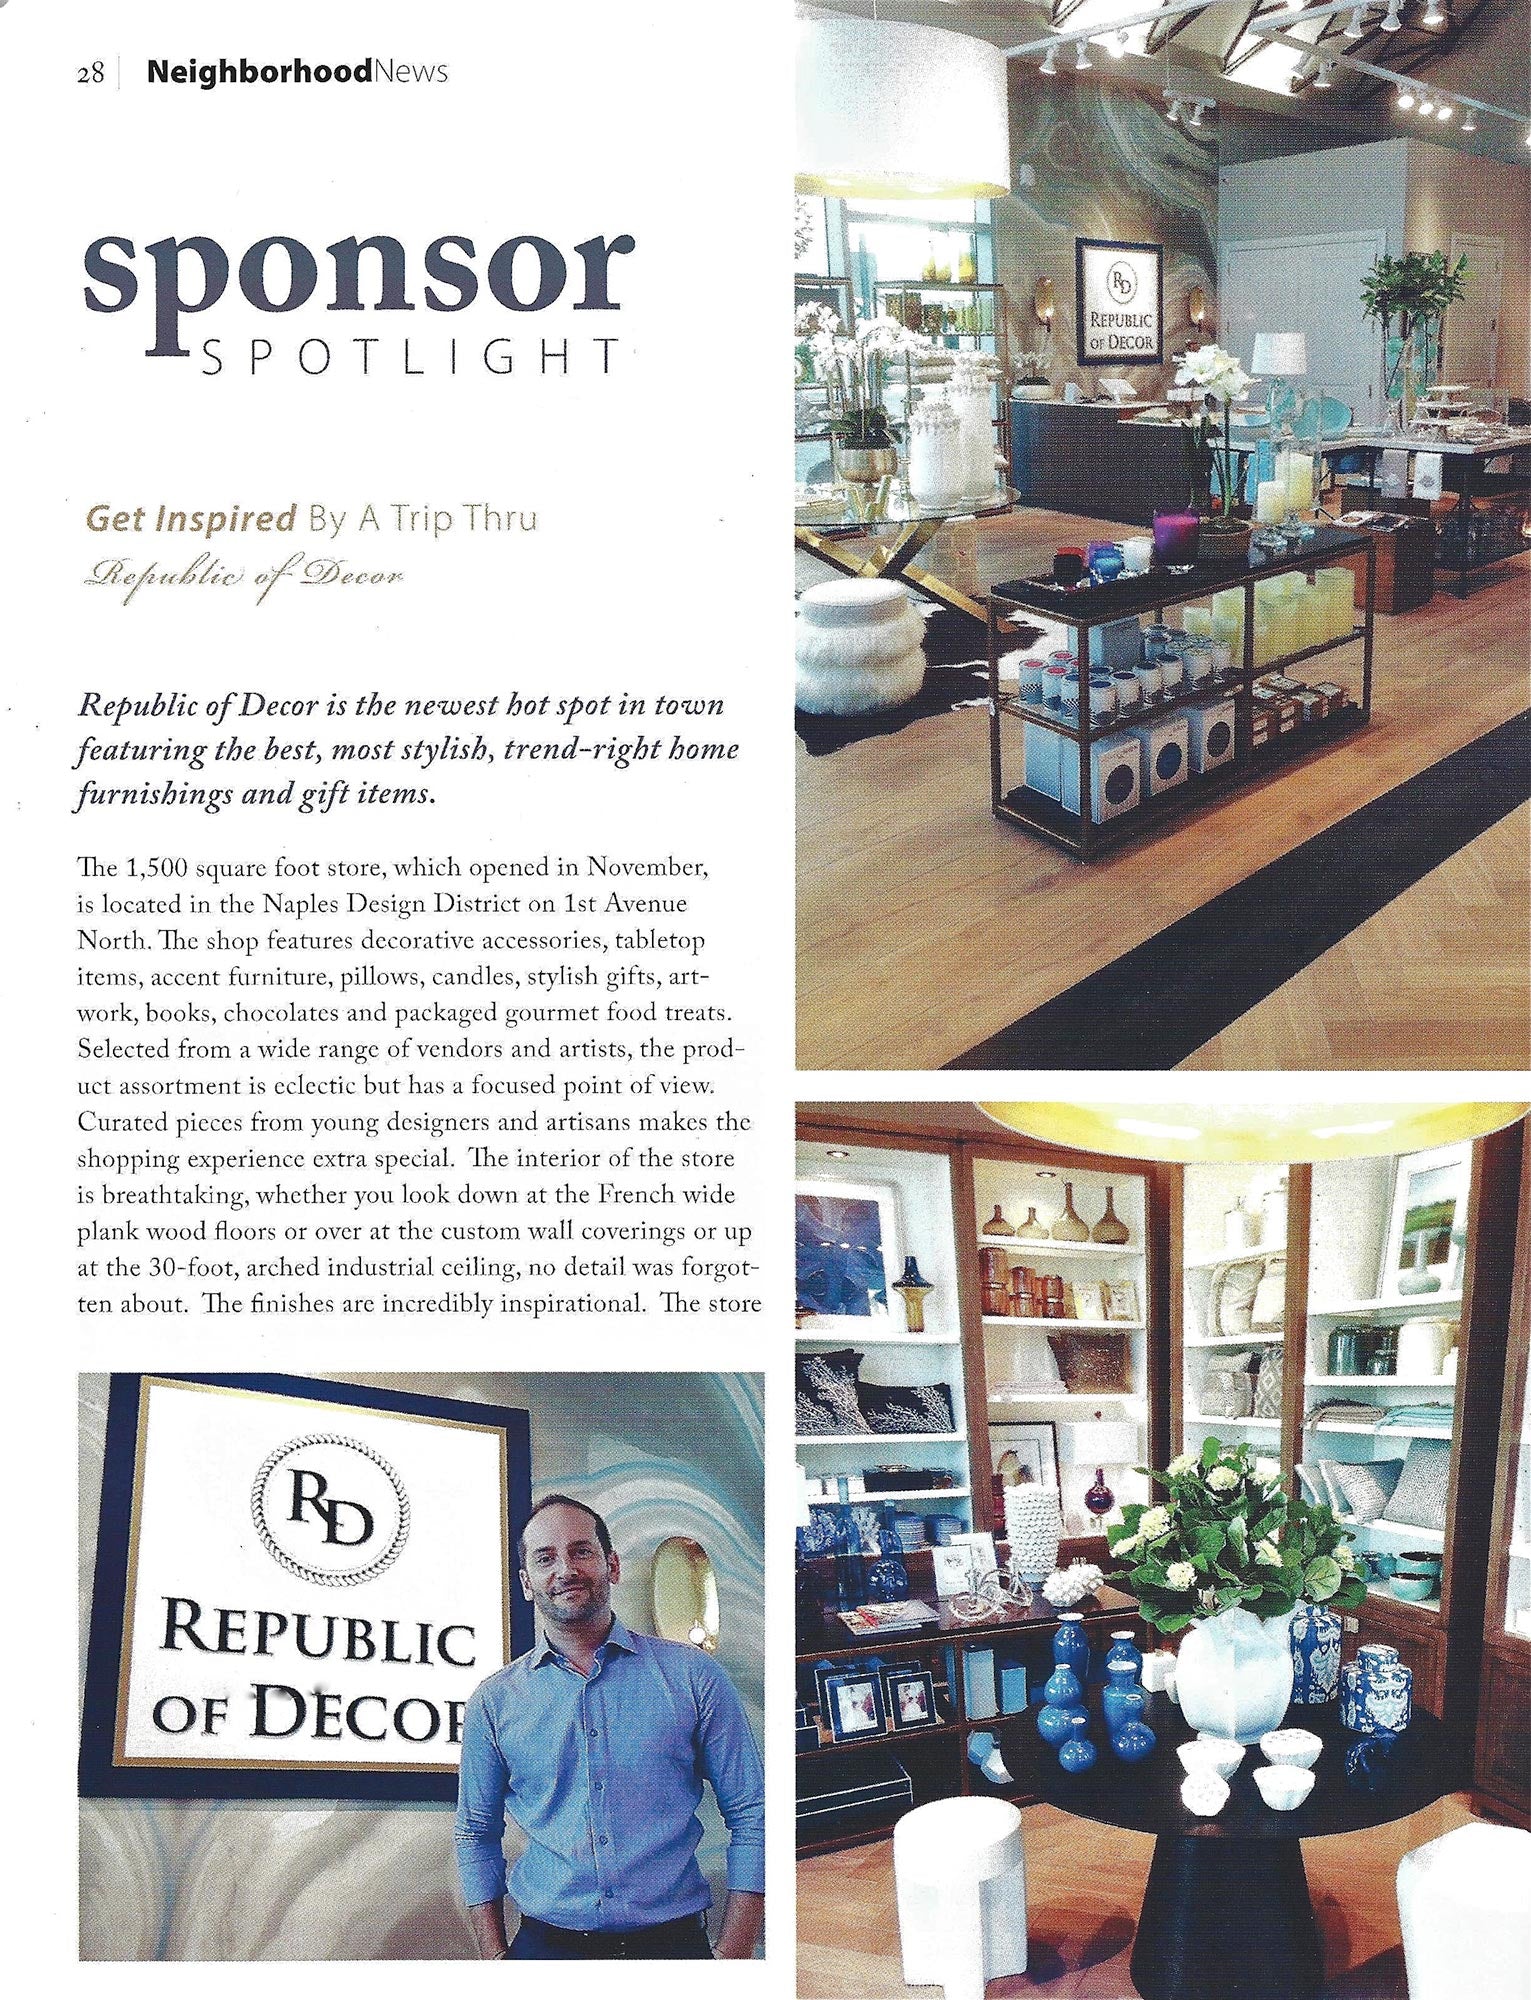 Republic of Decor is featured in Old Naples Living with David Fruscione, owner and interior designer